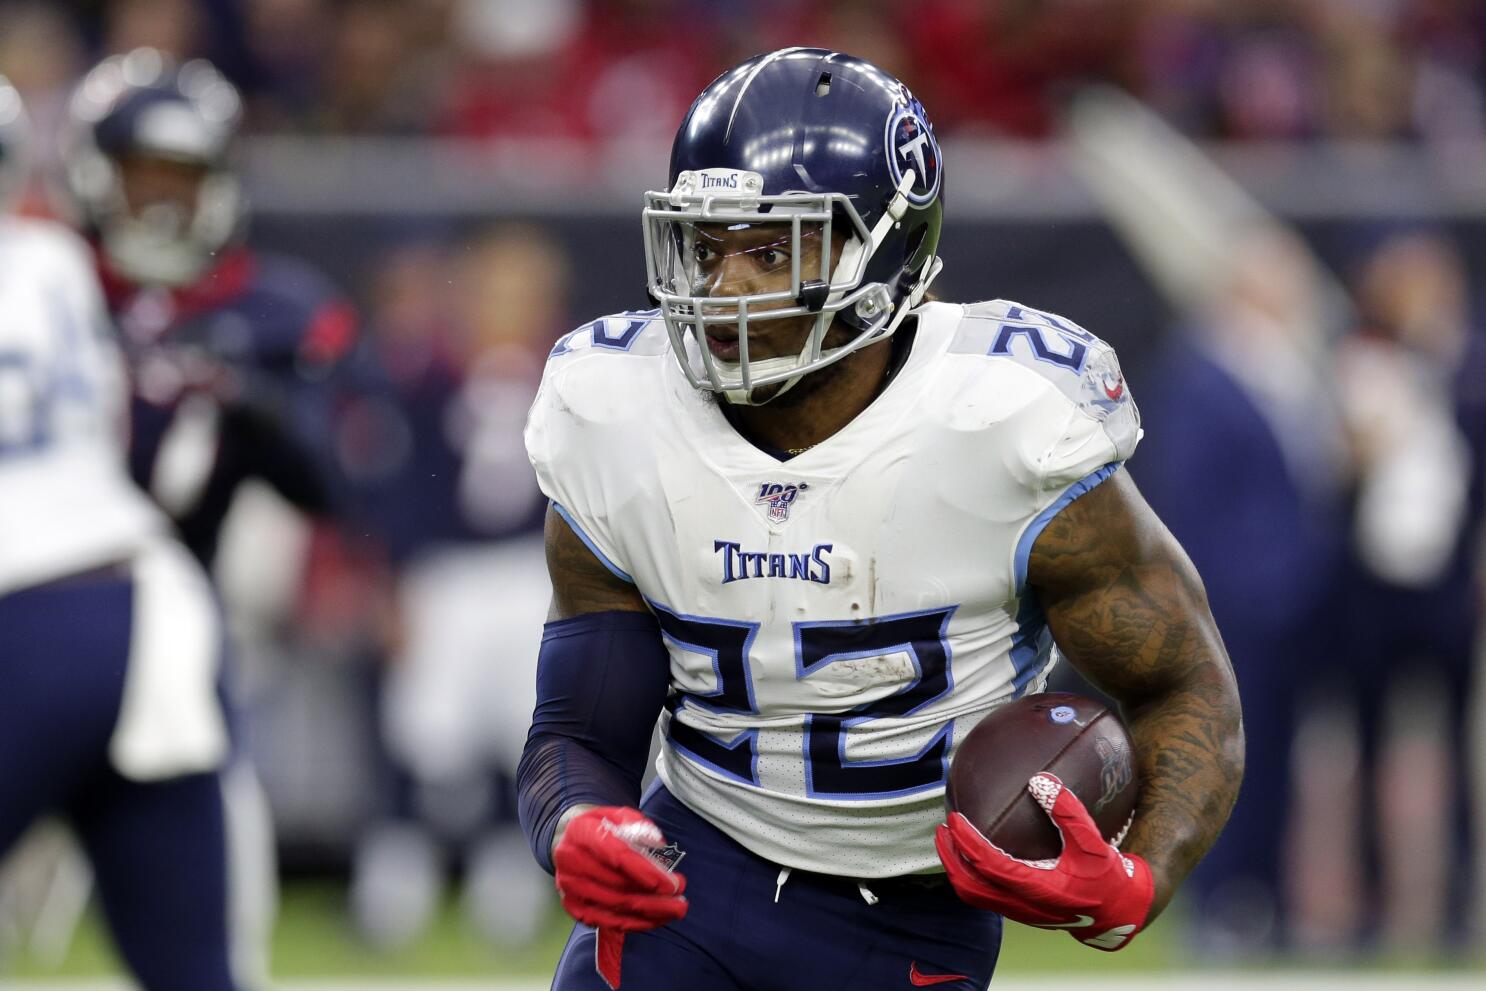 Titans RB Derrick Henry: “When My Number is Called, I'm Just Going